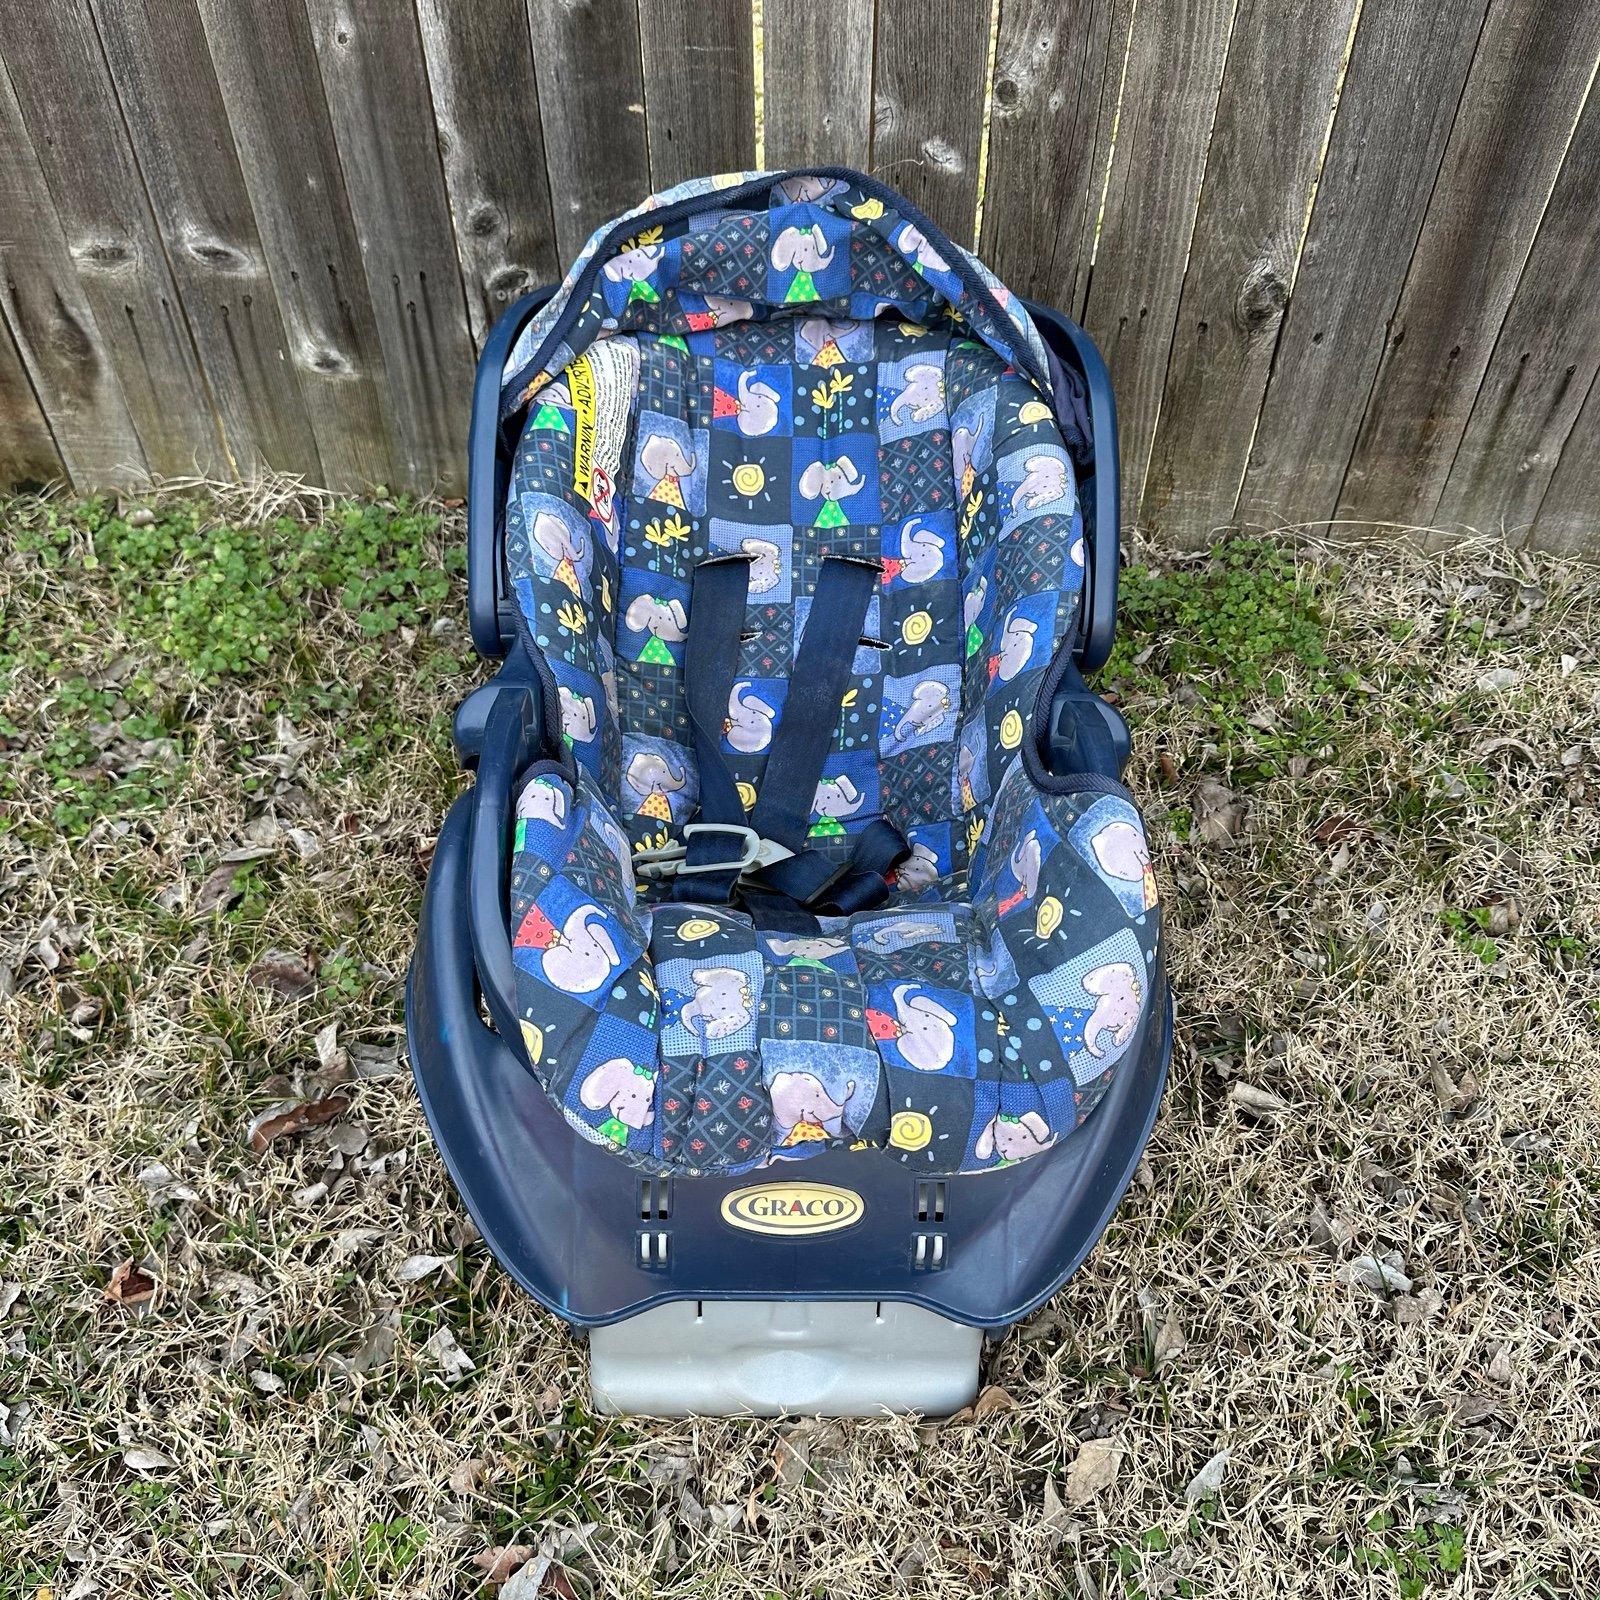 Vintage Graco Baby Seat Carrier With Base Elephant Allover Print Multicolor Nt5WbOp3q